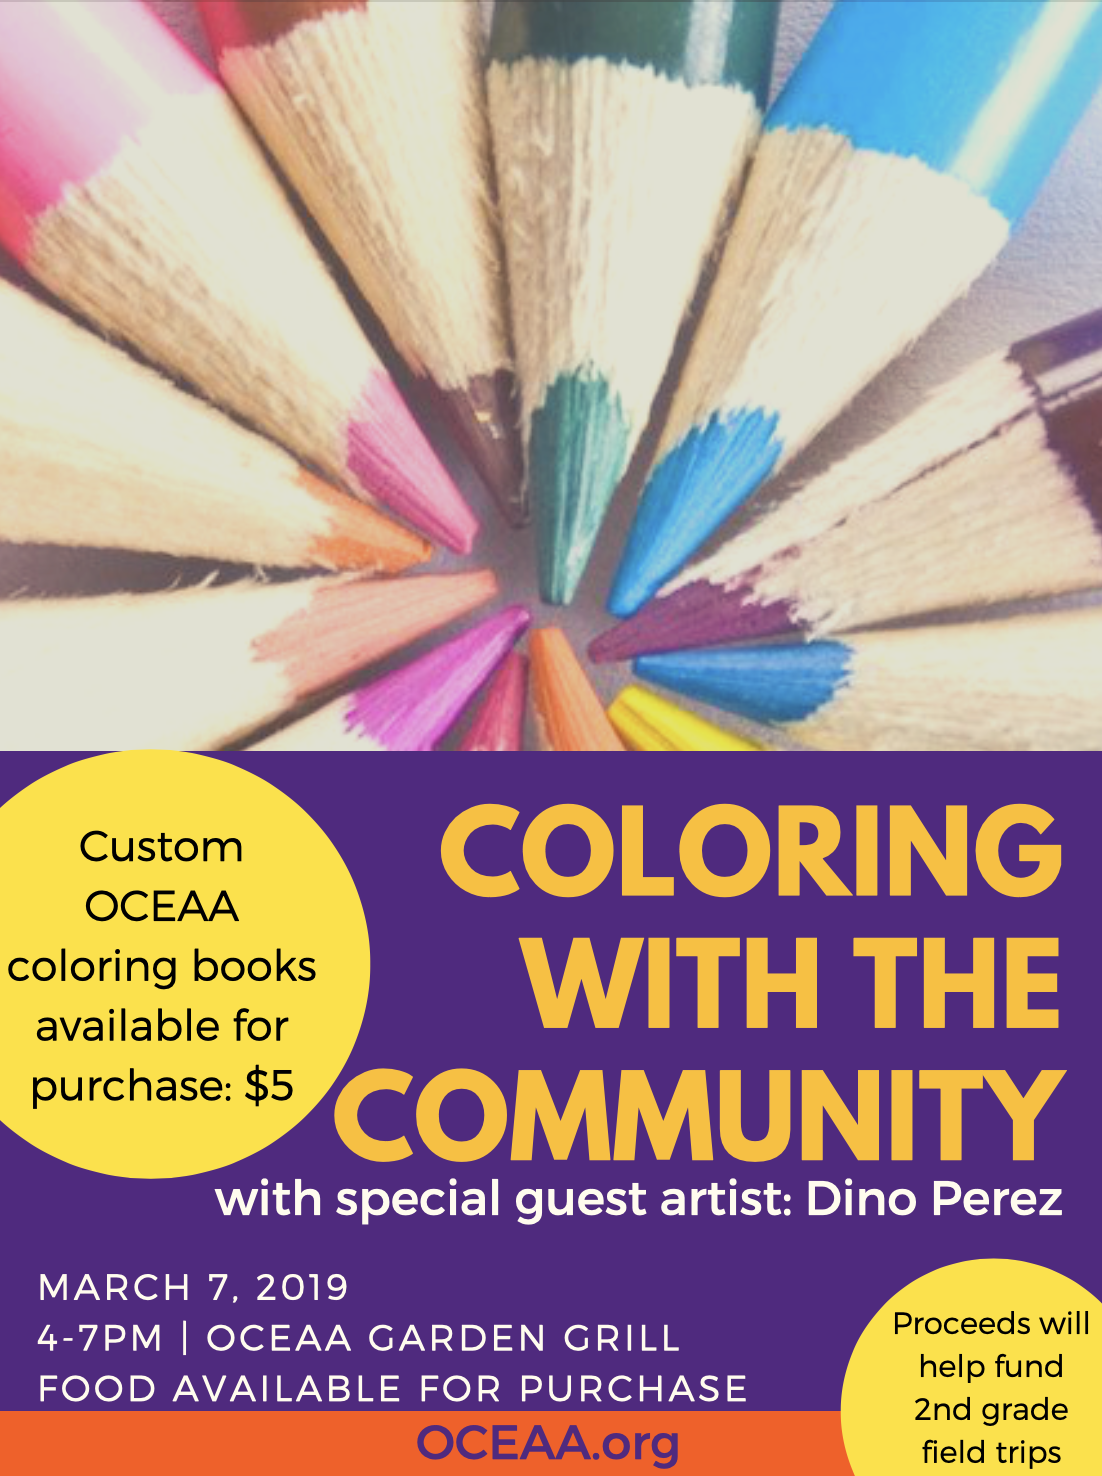 Coloring with the Community with Dino Perez - oceaa.org